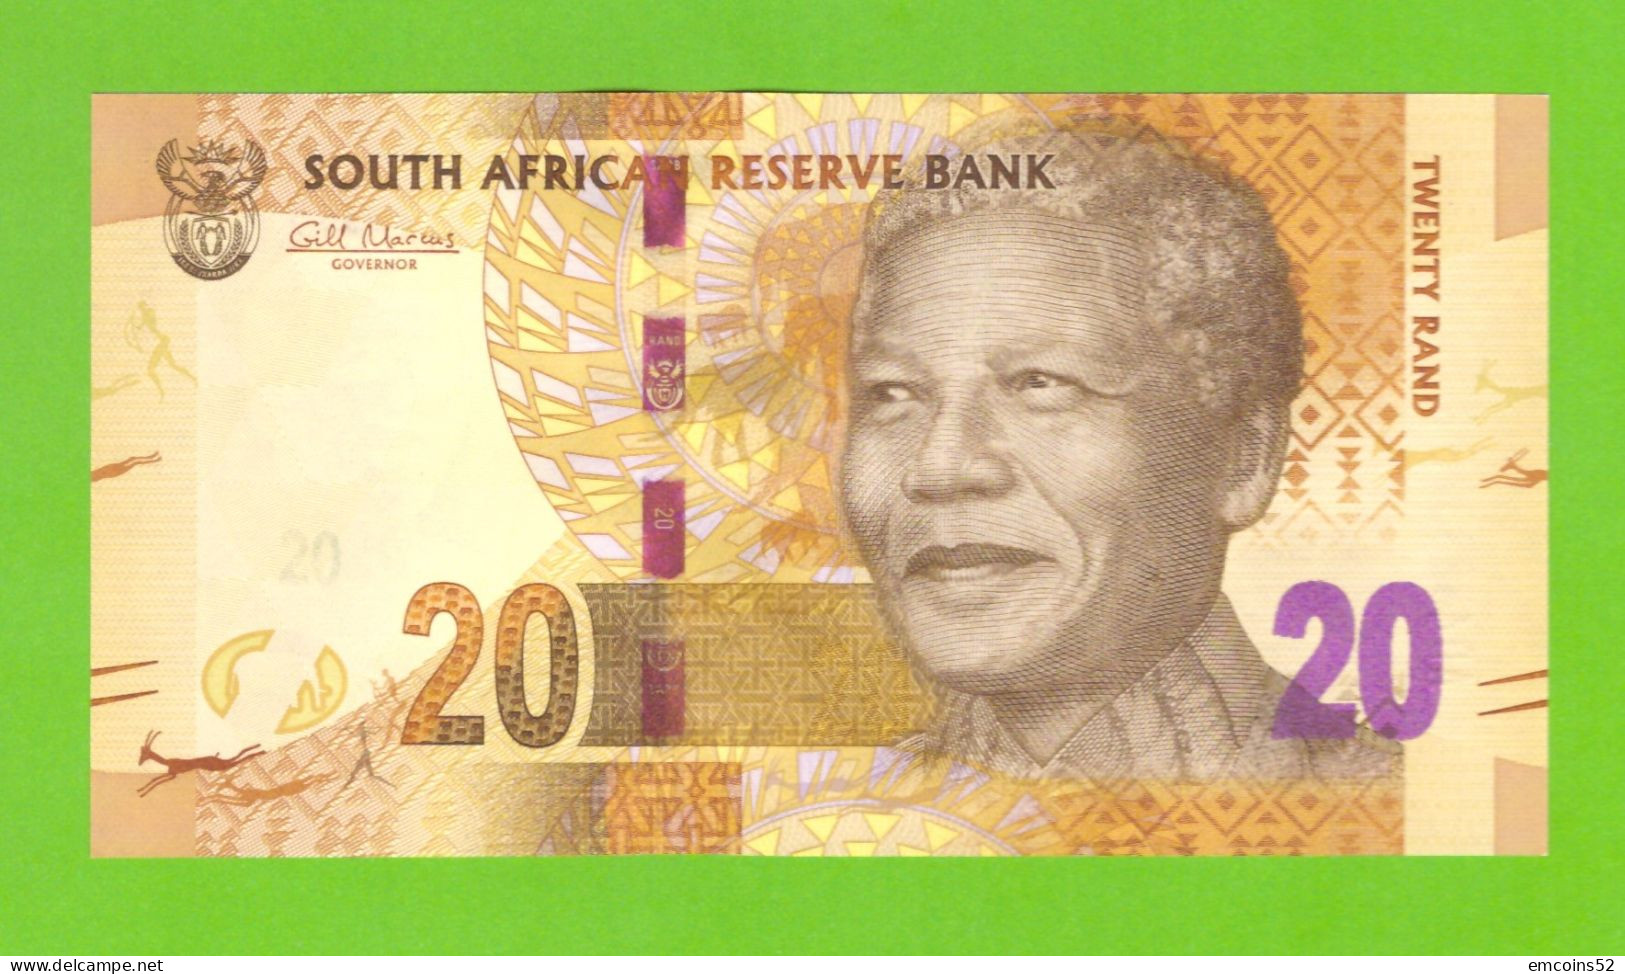 SOUTH AFRICA 20 RAND 2012 P-134 UNC - South Africa